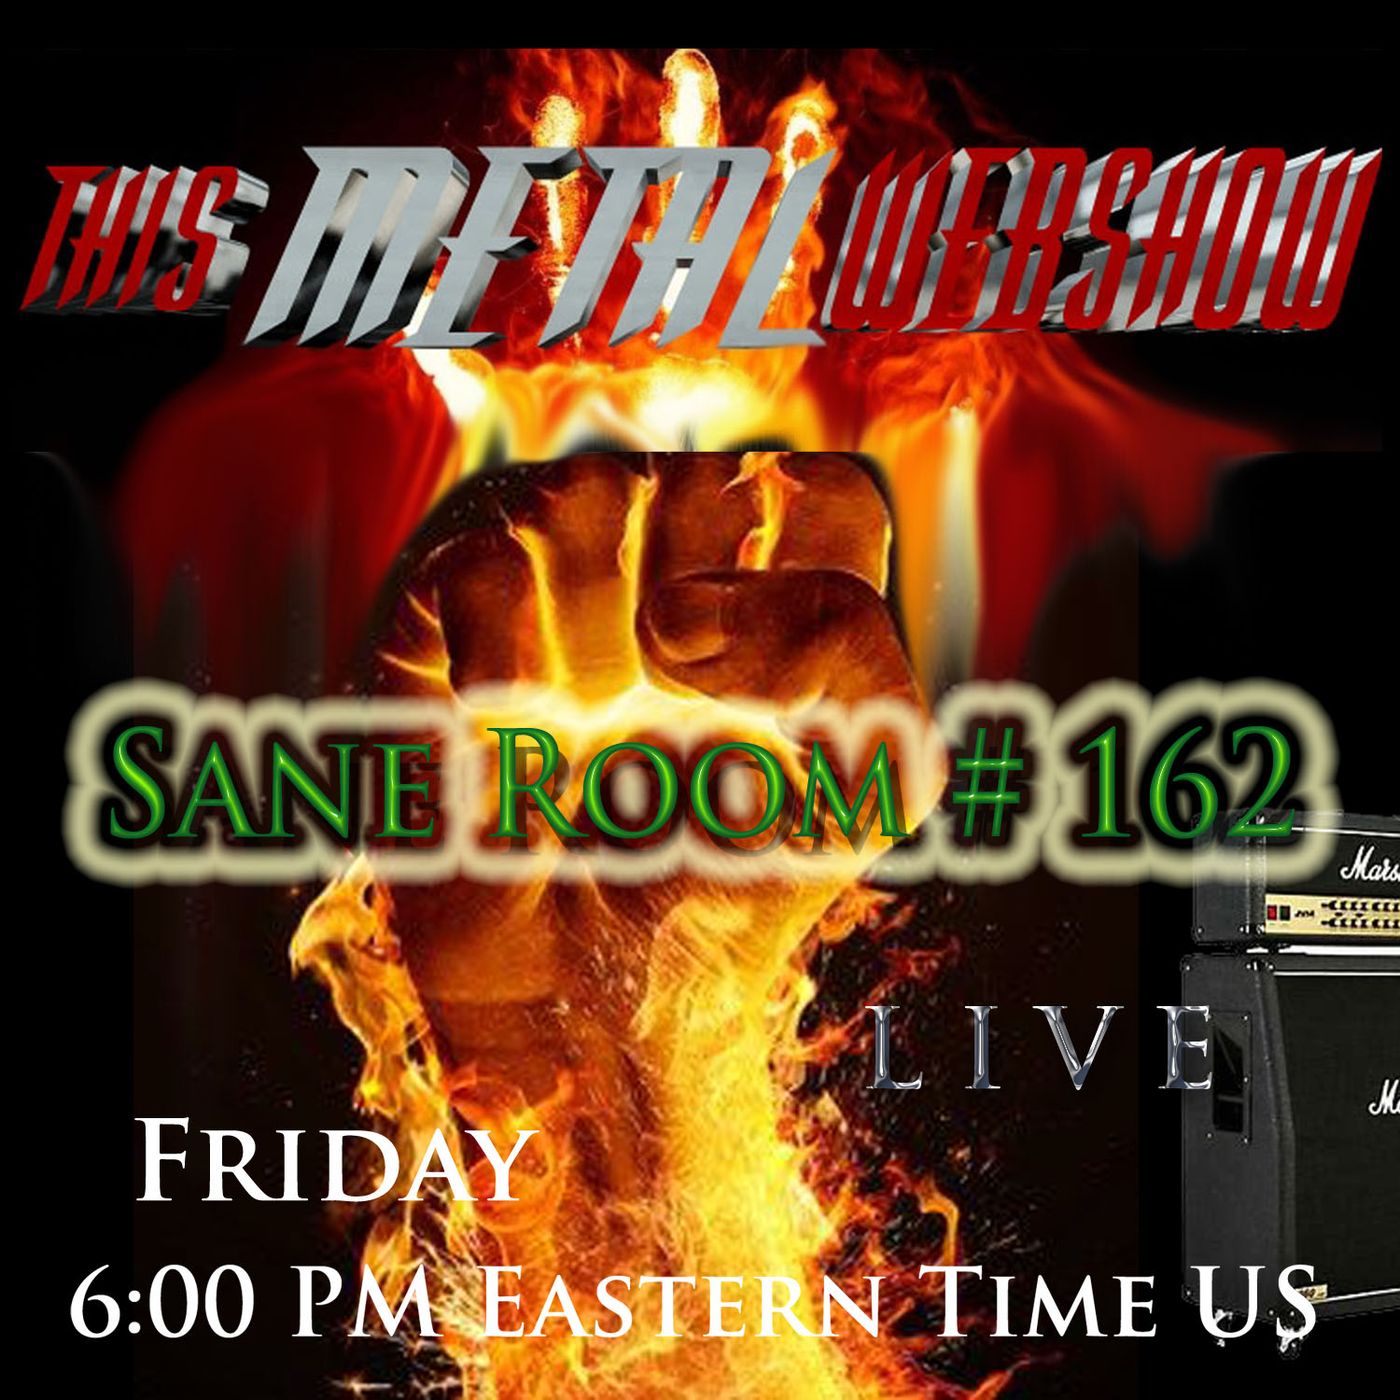 This Metal Webshow Sane Room # 162 LIVE